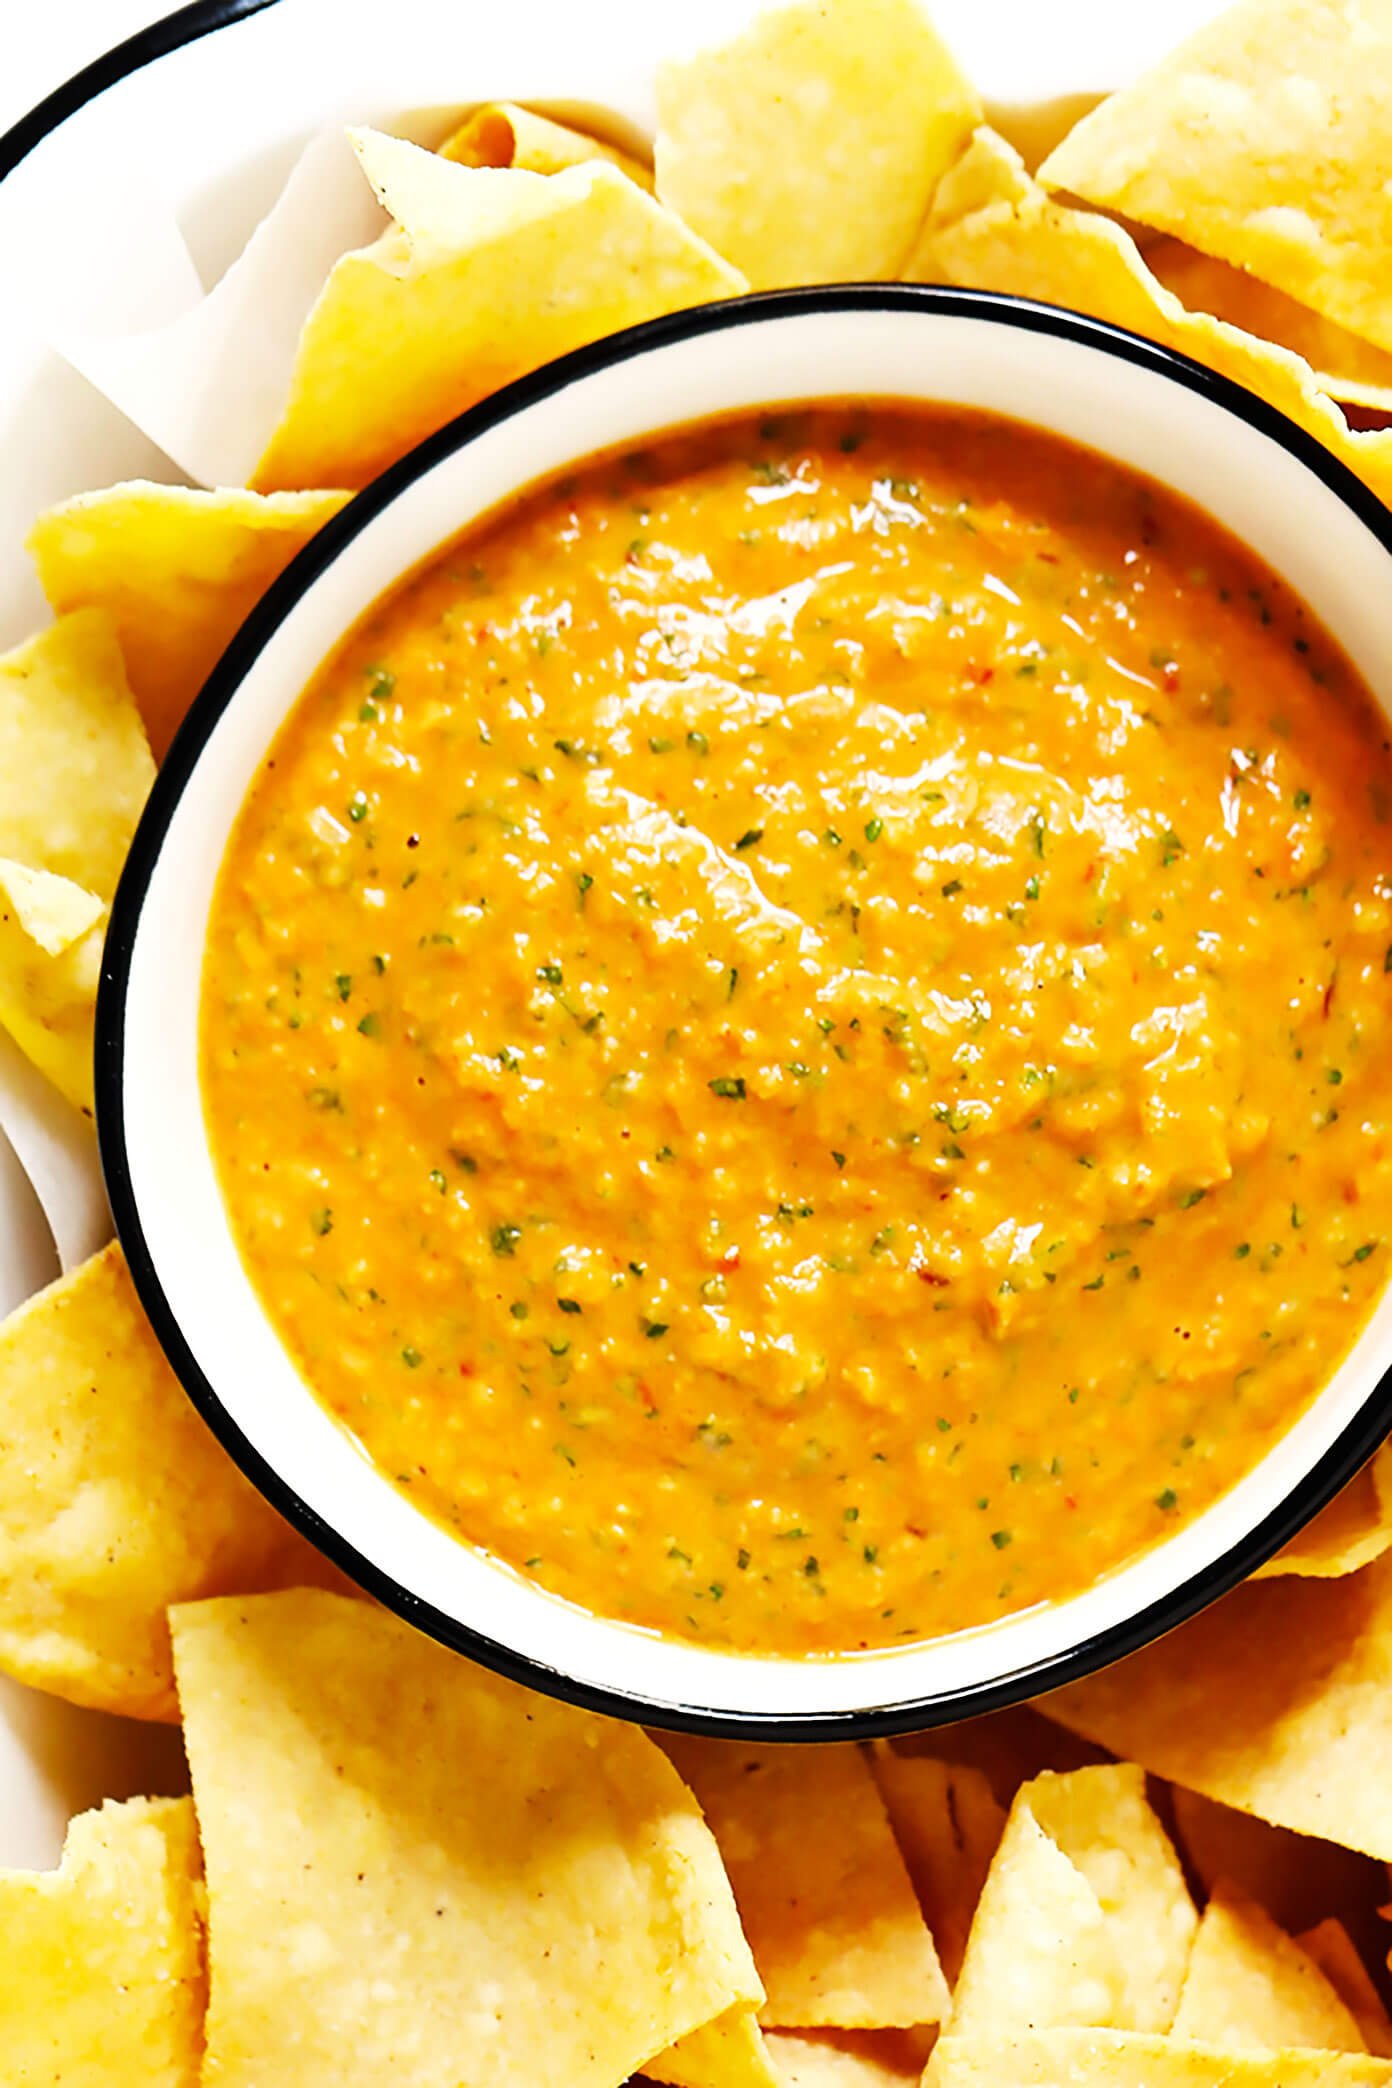 Chipotle Peanut Salsa in a bowl with tortilla chips